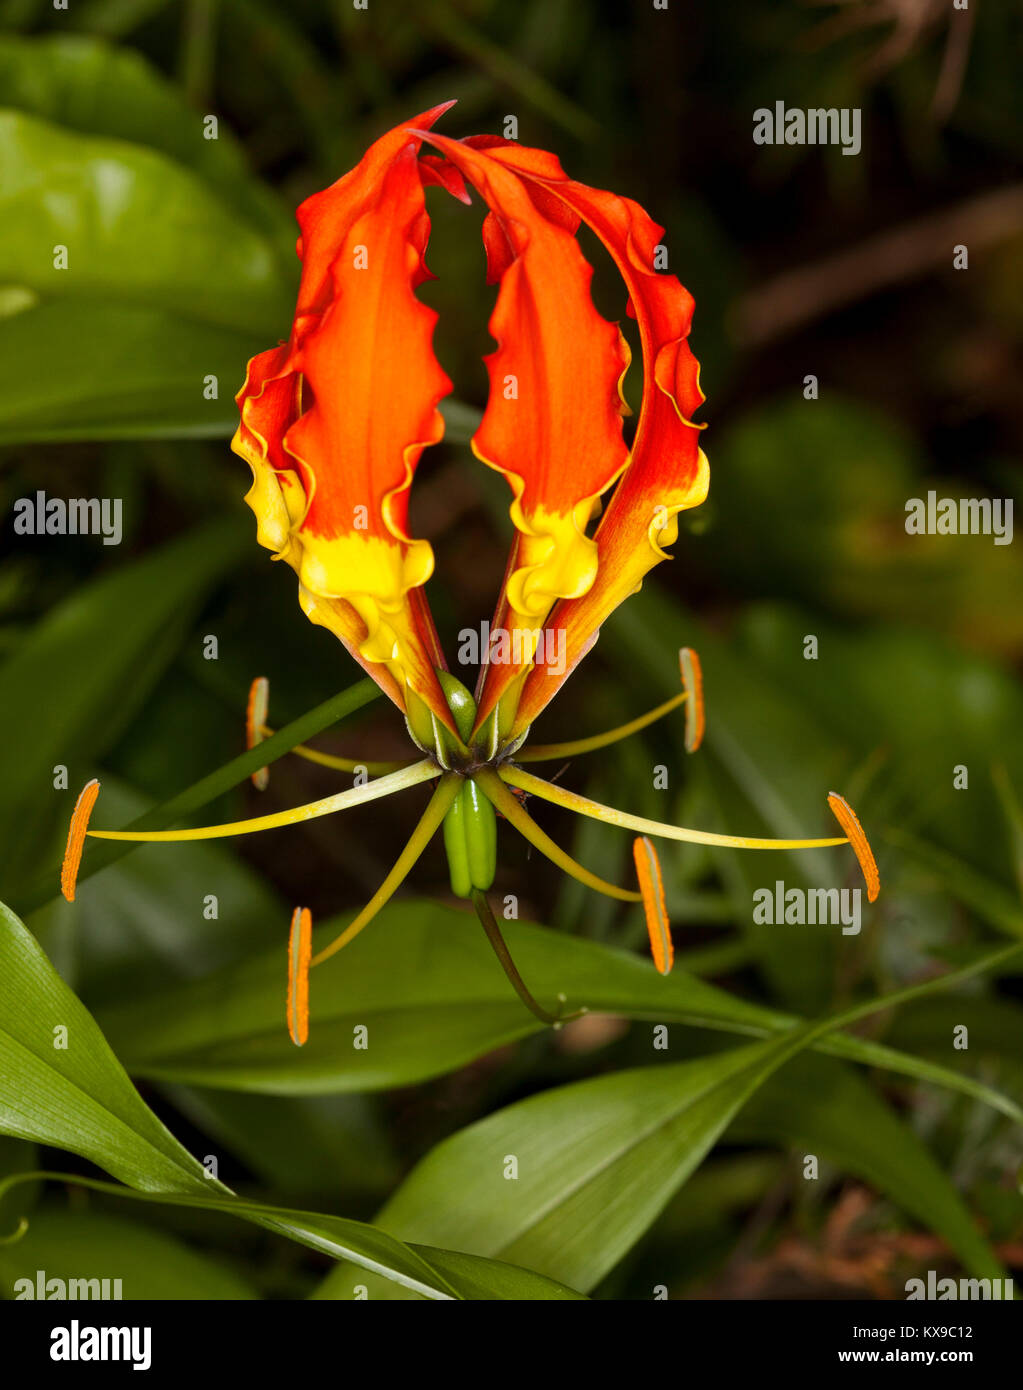 Beautiful & unusual orange and yellow flower and green leaves of gloriosa lily, Gloriosa superba, a climbing plant / Australian weed species Stock Photo